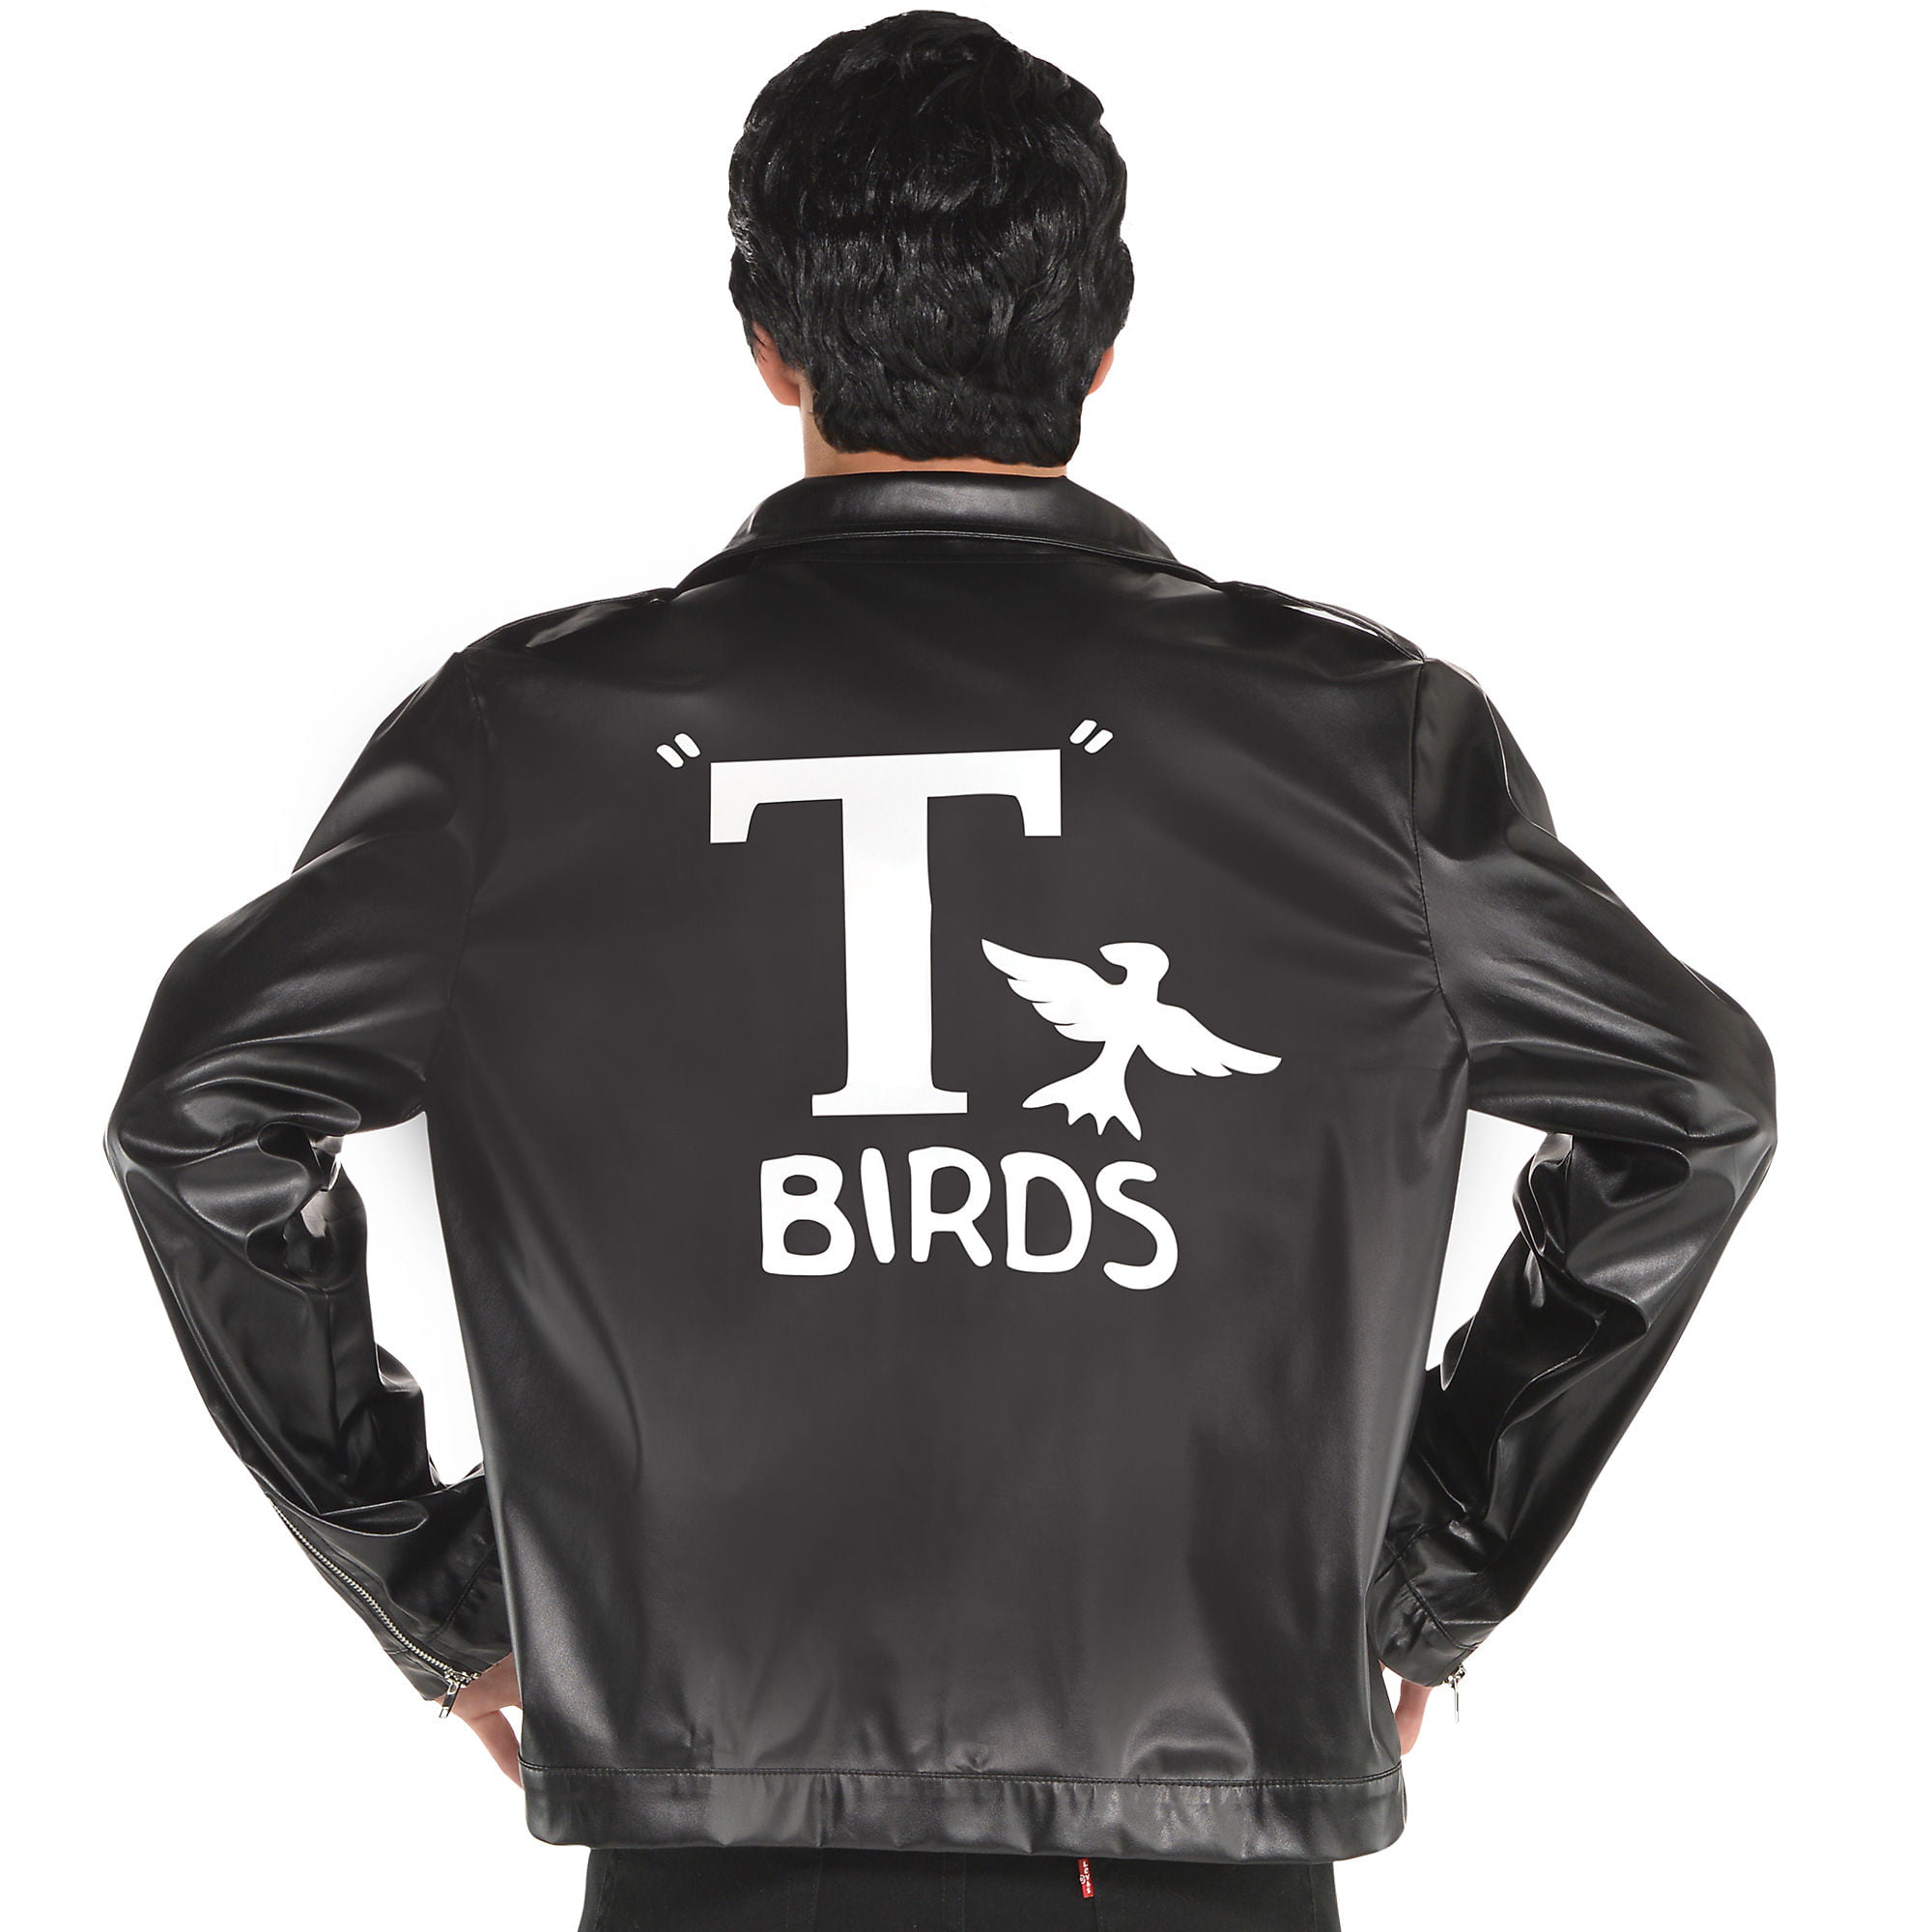 T Birds Leather Jacket Grease, Kill Bed Bugs Leather Jacket